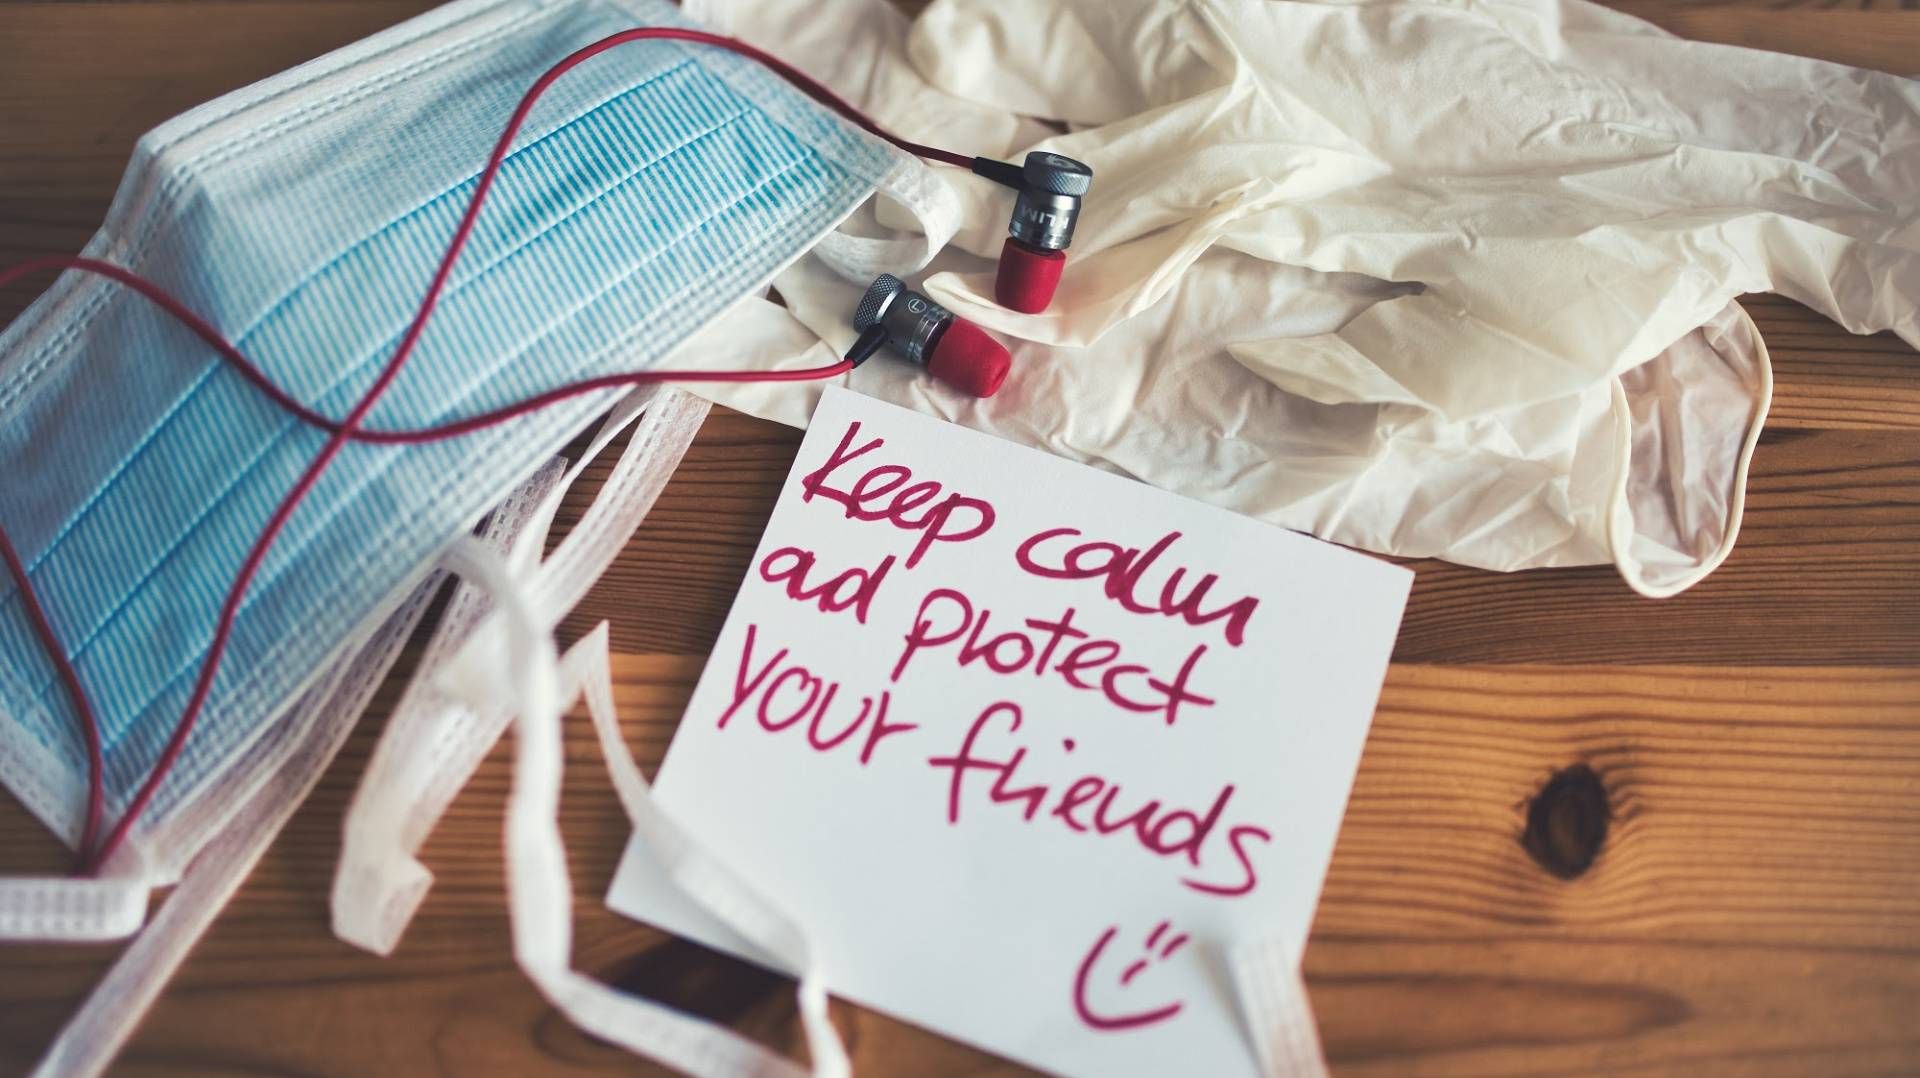 A blue surgical mask, a pair of medical gloves and some ear plugs are piled together on a wooden table.  Next to the items is a white, square note with "Keep Calm and protect your friends" and a smiley face is written in dark pink ink. 